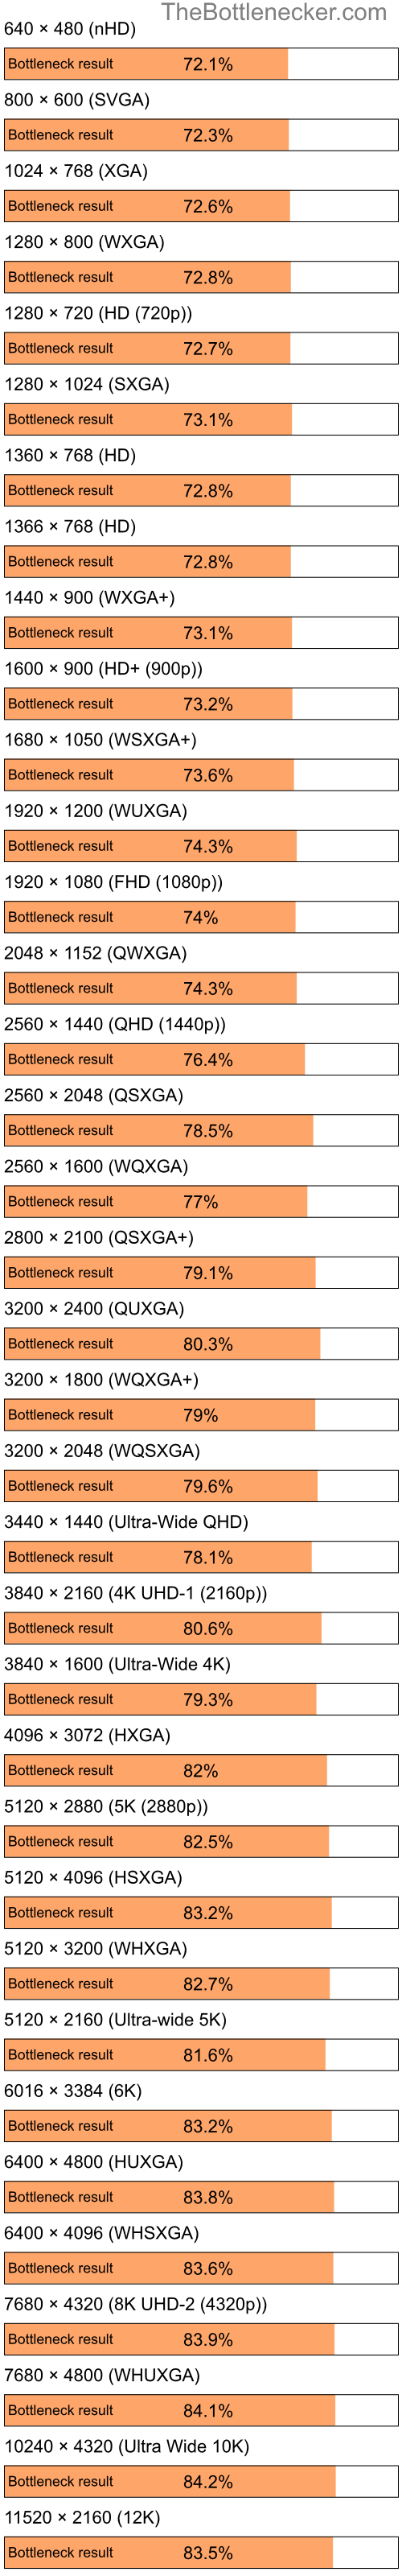 Bottleneck results by resolution for Intel Atom Z520 and AMD Mobility Radeon 4100 in Graphic Card Intense Tasks